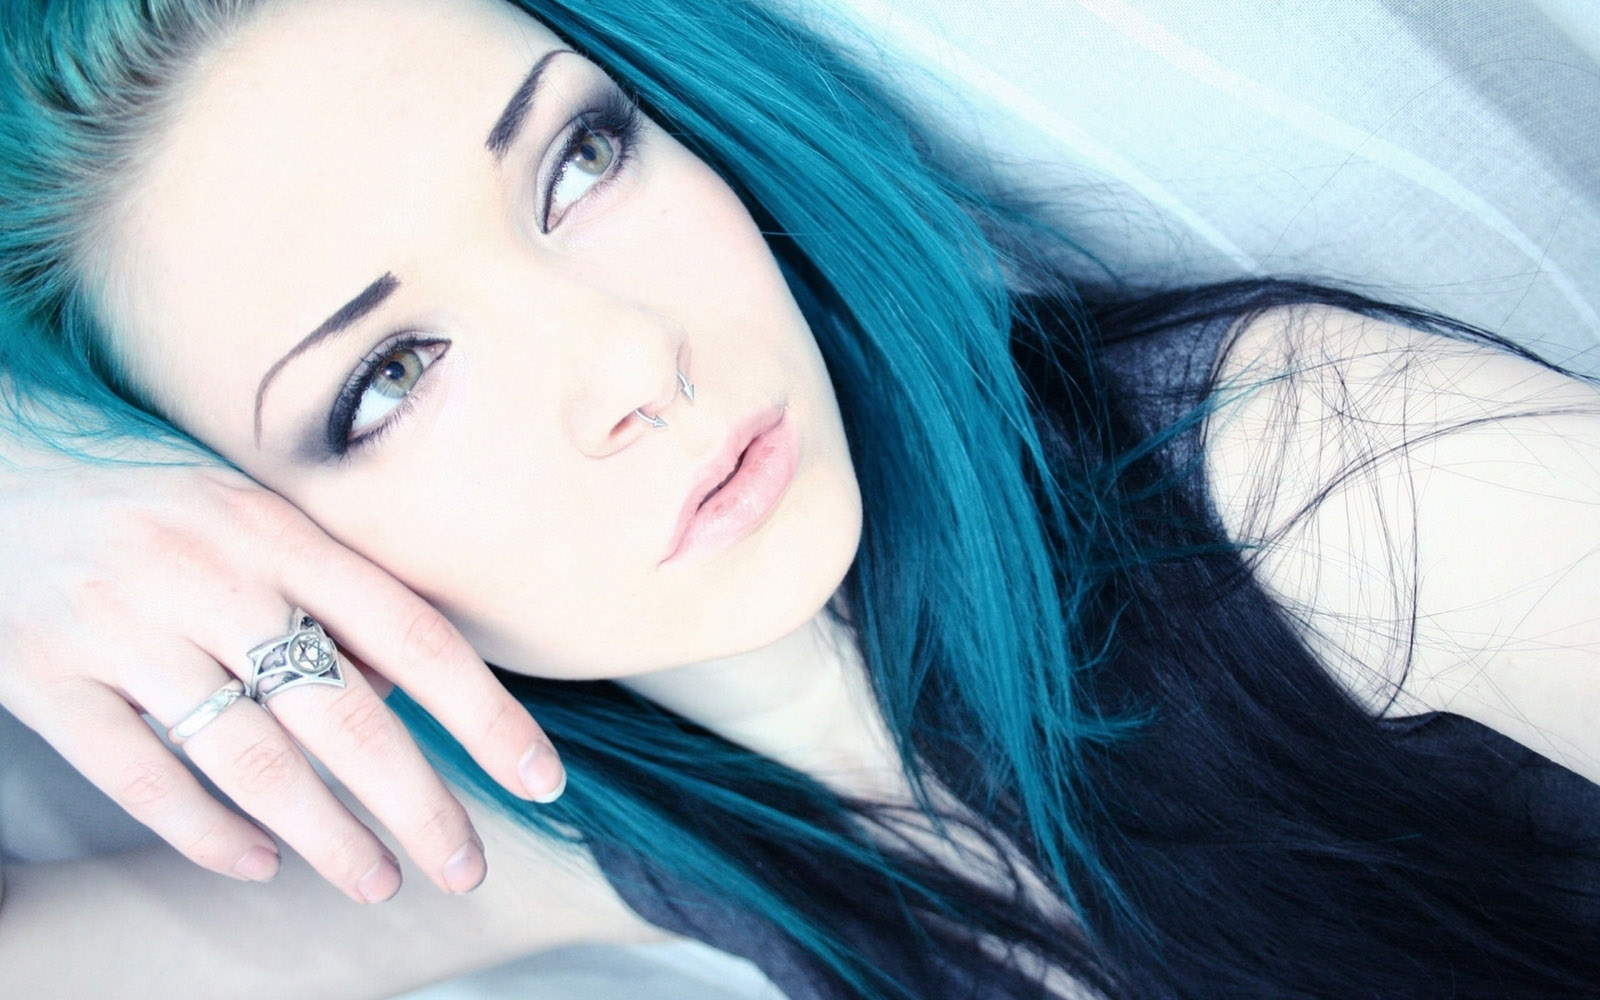 cute emo girl hd wallpaper has recently added in stylish hd wallpapers 1600x1000